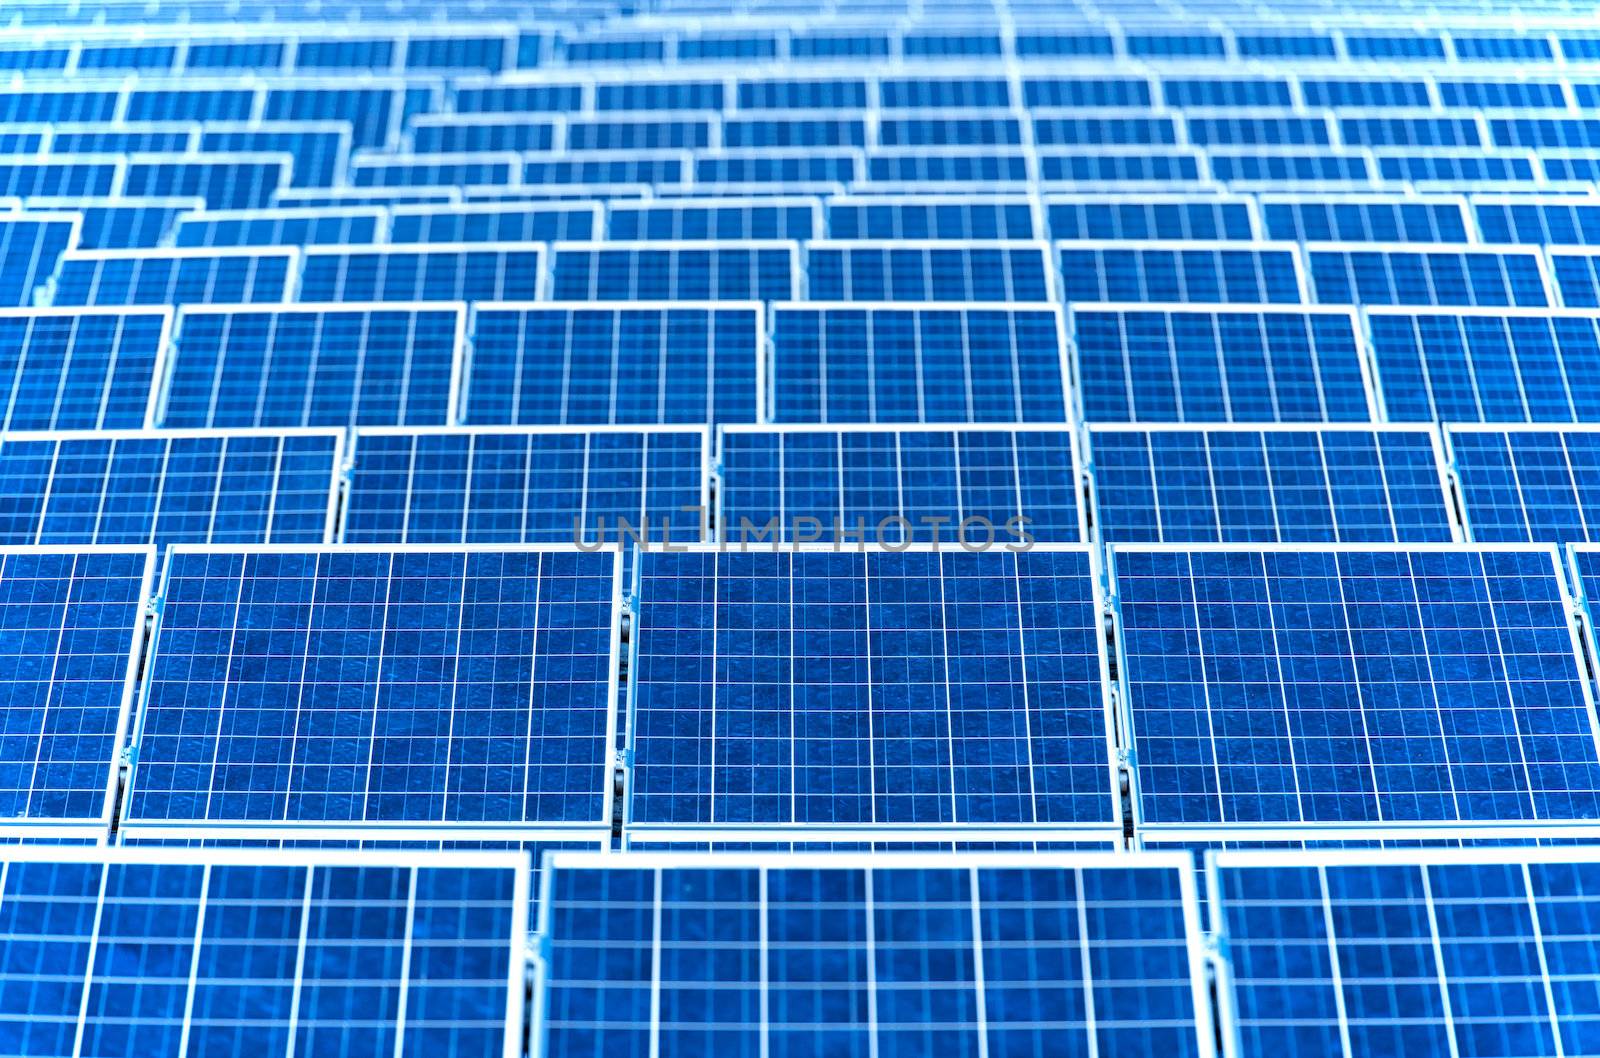 Photovoltaic Solar Panels For Renewable Electrical Energy Production